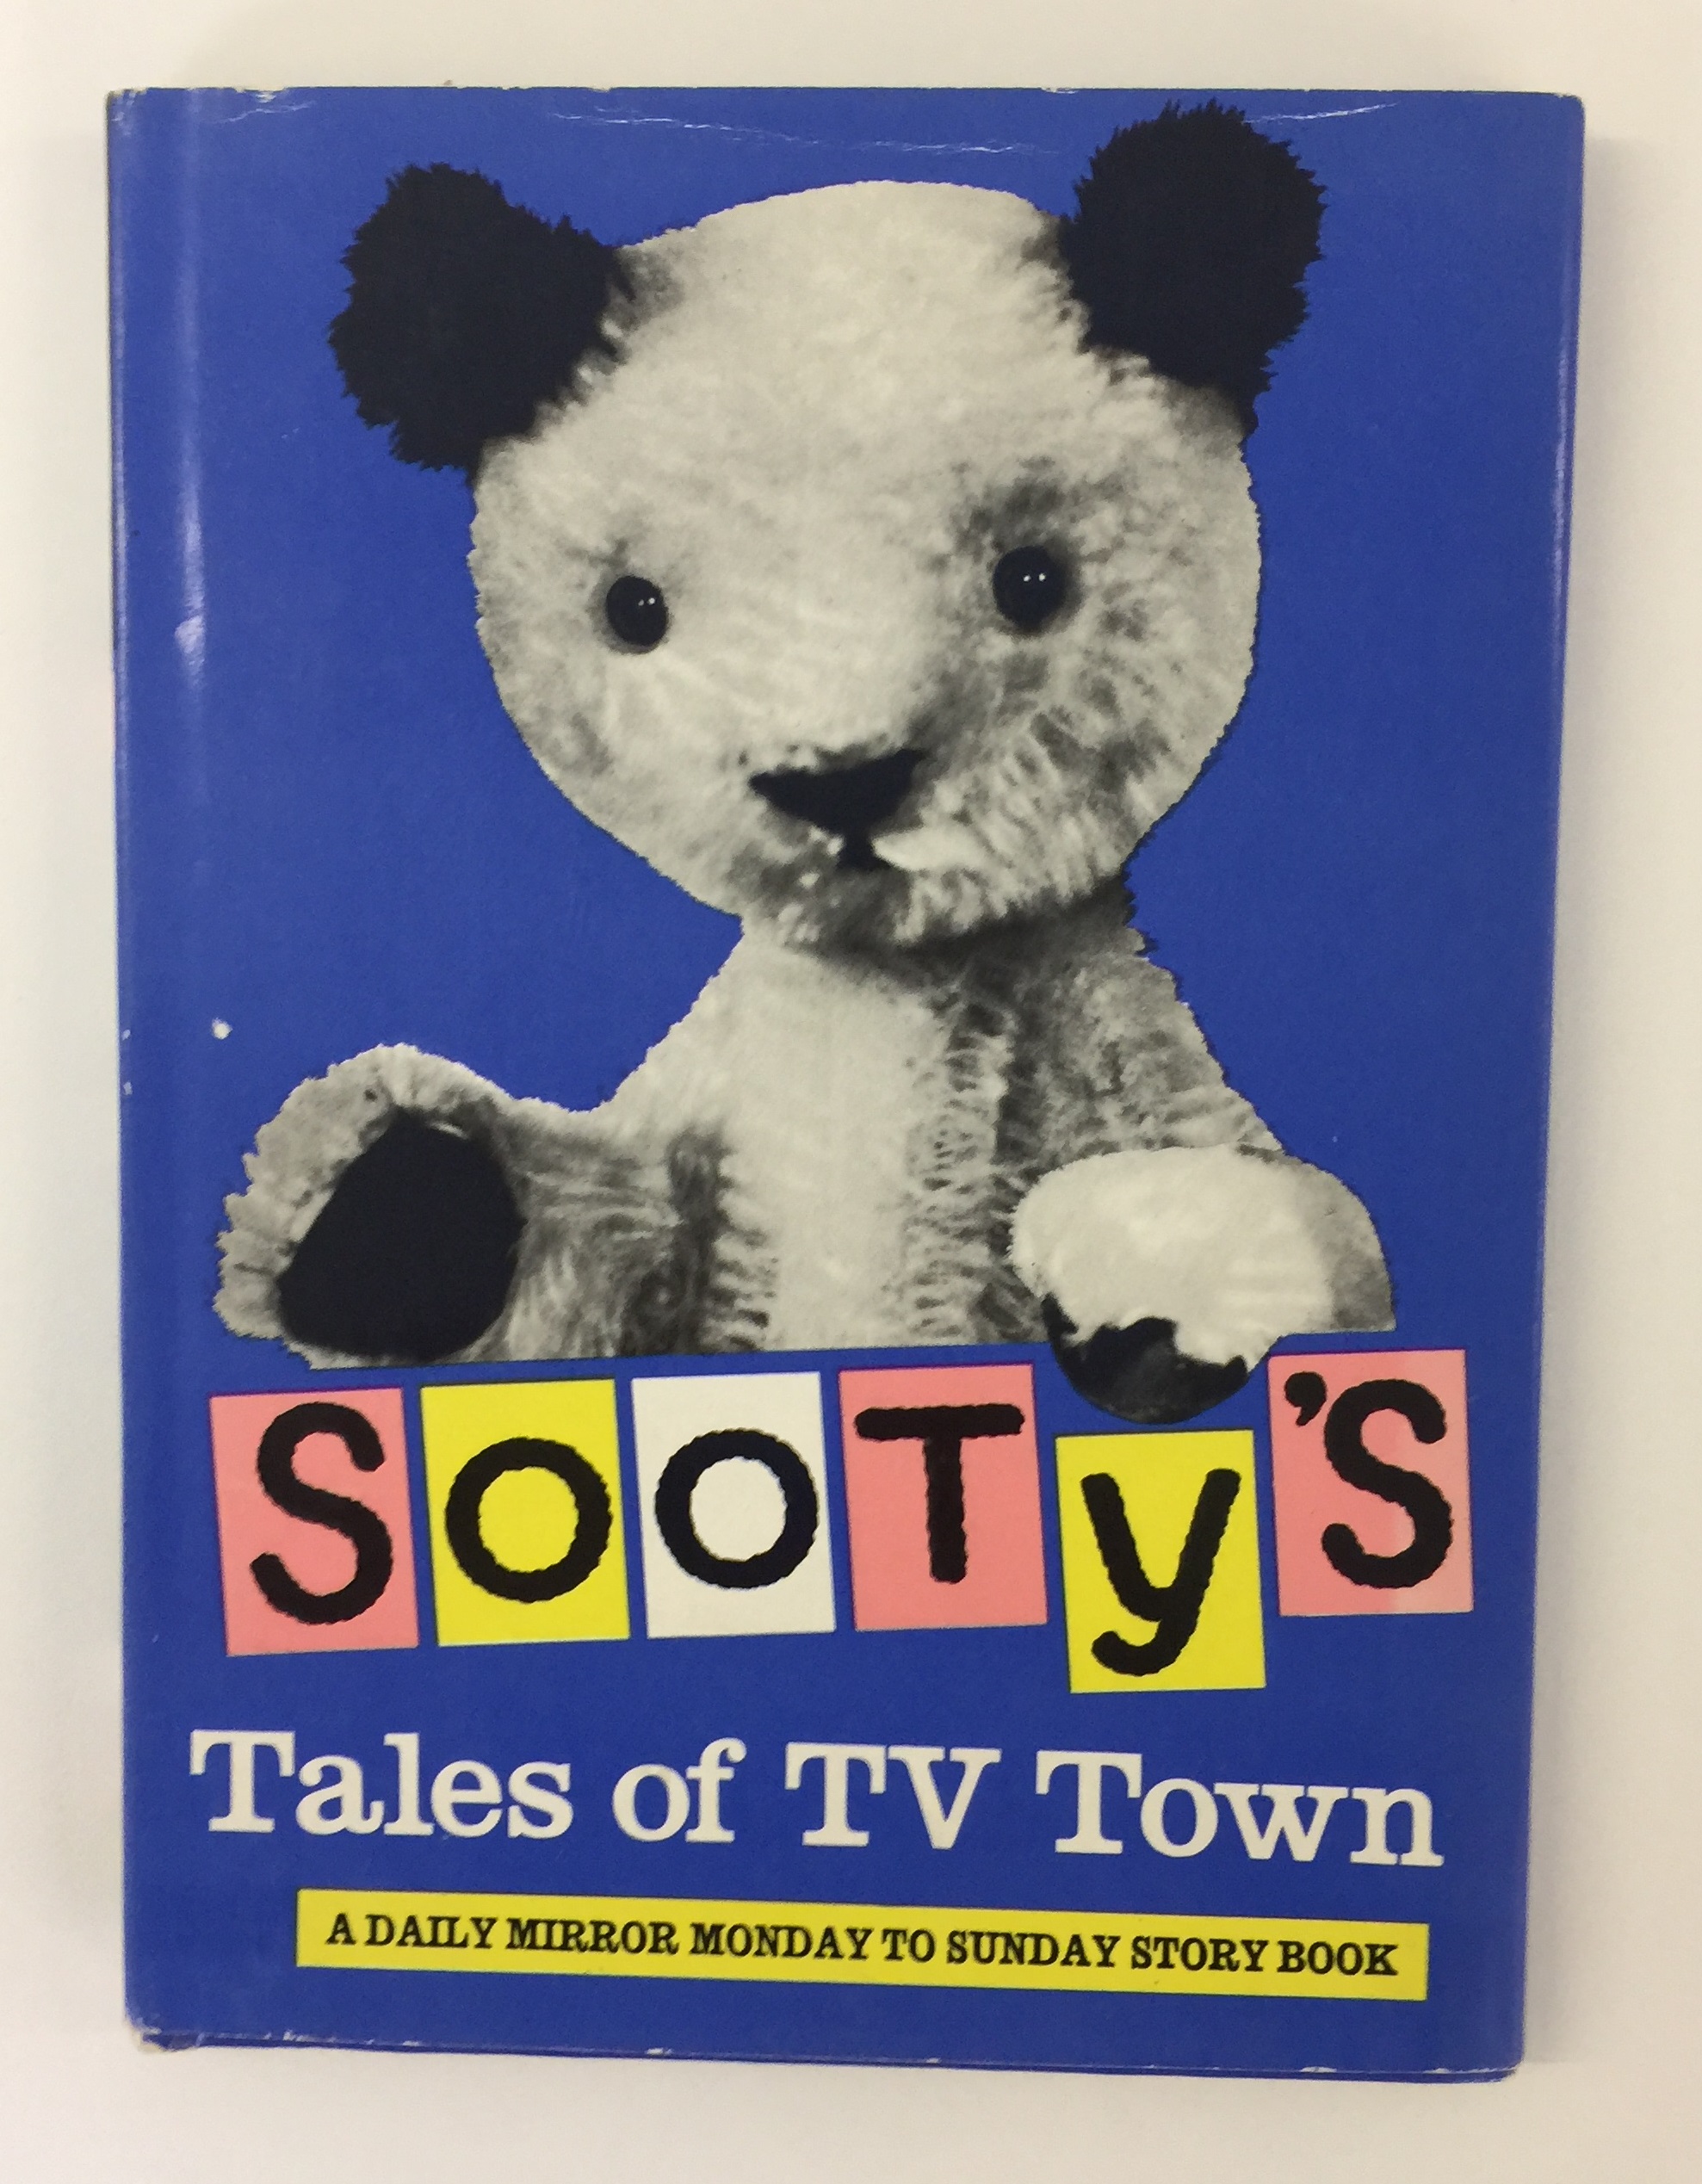 SOOTY HARRY CORBETT SIGNED - A daily Mirror Monday to Sunday story book - 'Sootys Tales of Tv Town' - Image 2 of 2